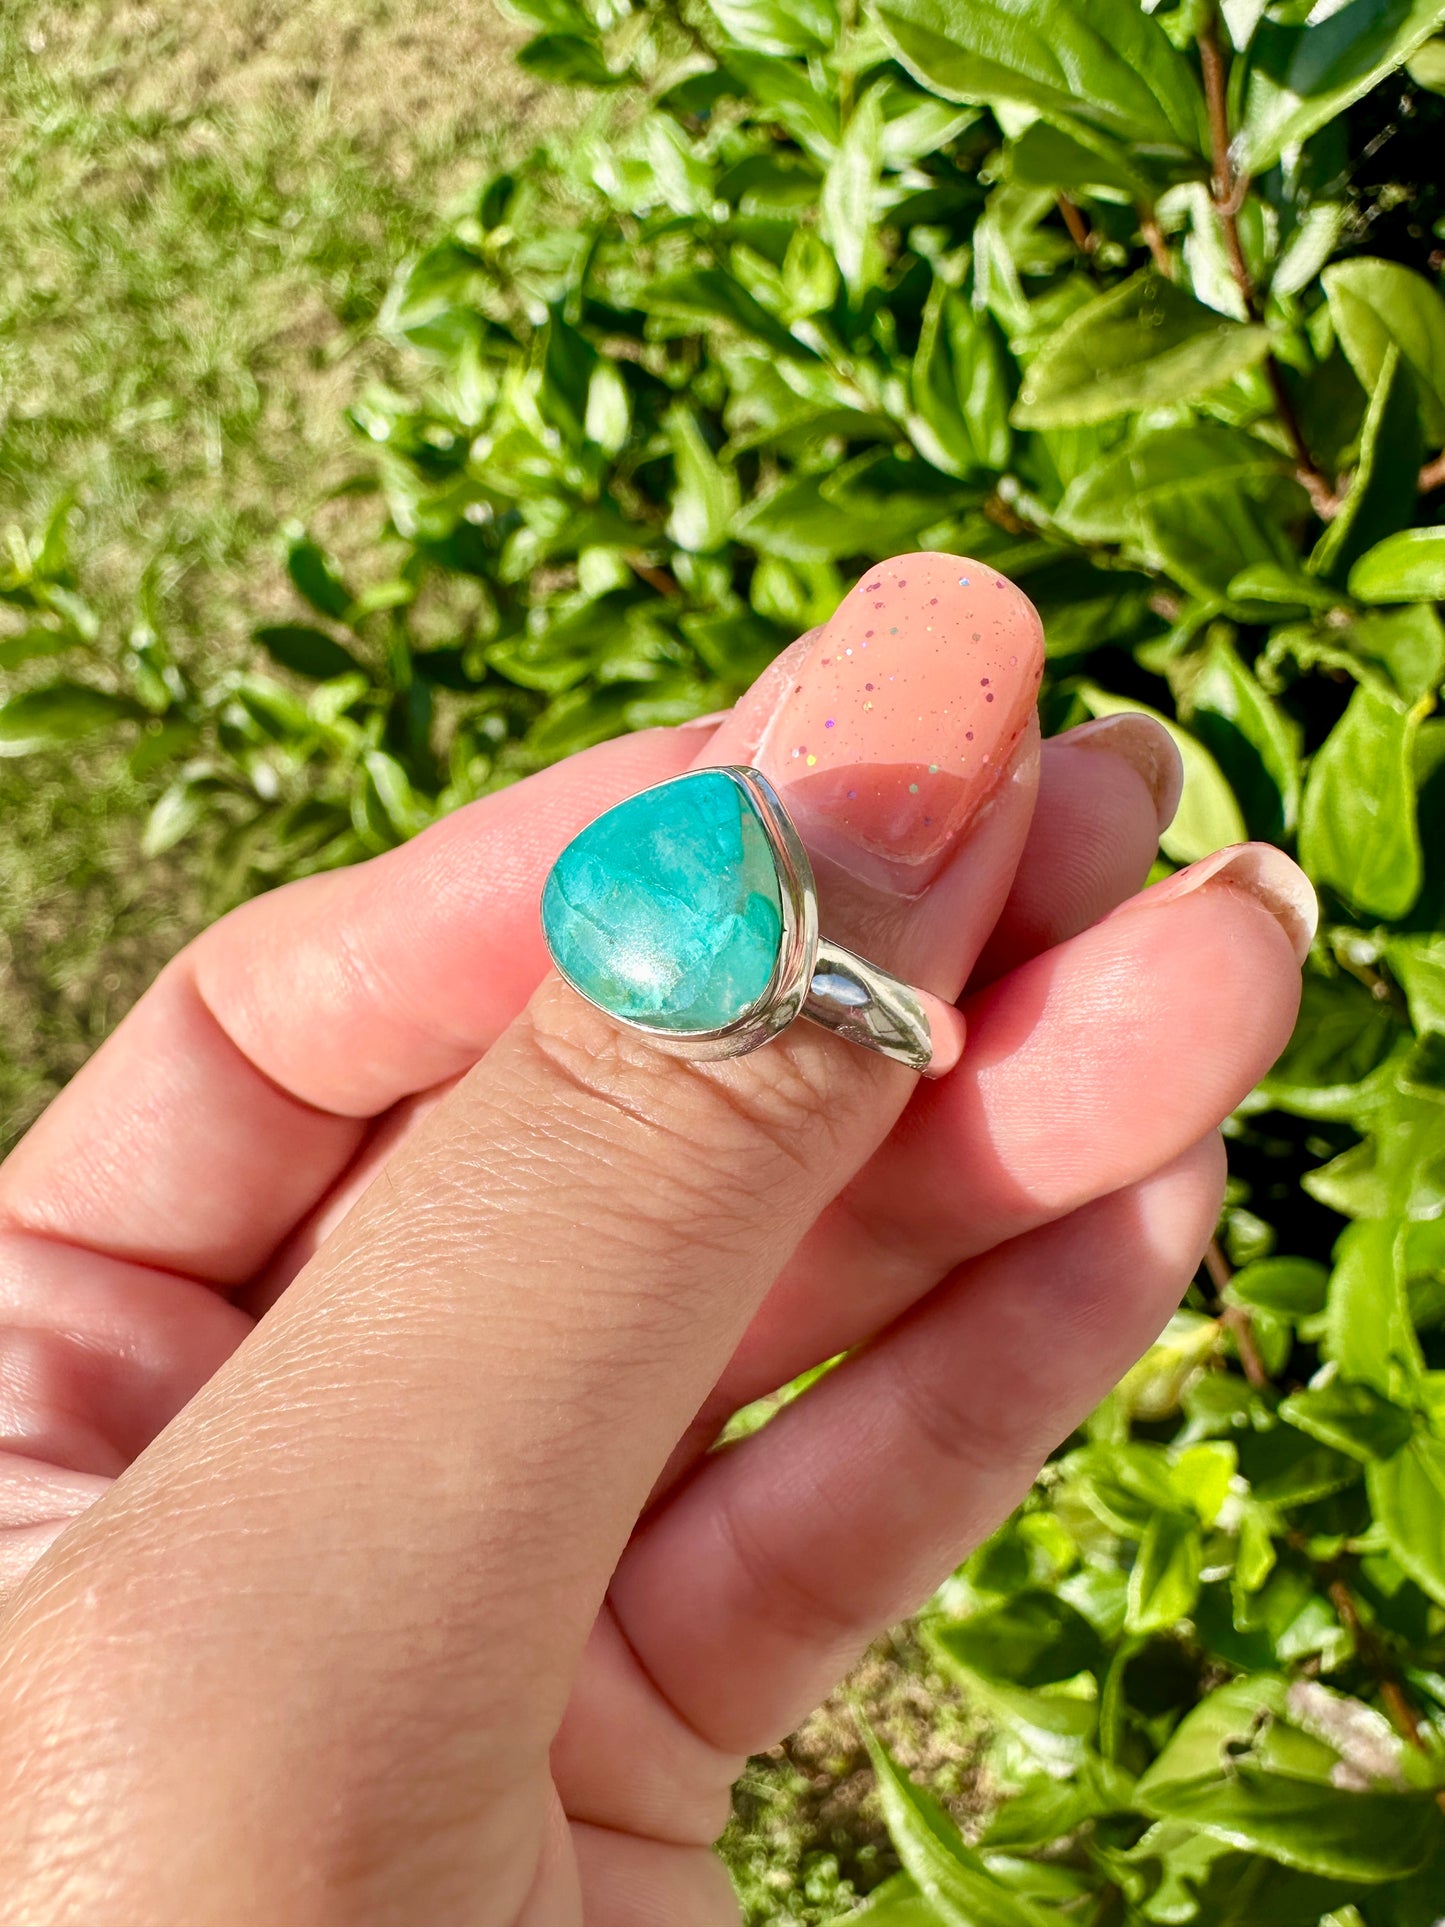 Stunning Amazonite Ring in Sterling Silver, Size 10.25 - Elegant Handcrafted Gemstone Jewelry, Perfect Gift for Special Occasions